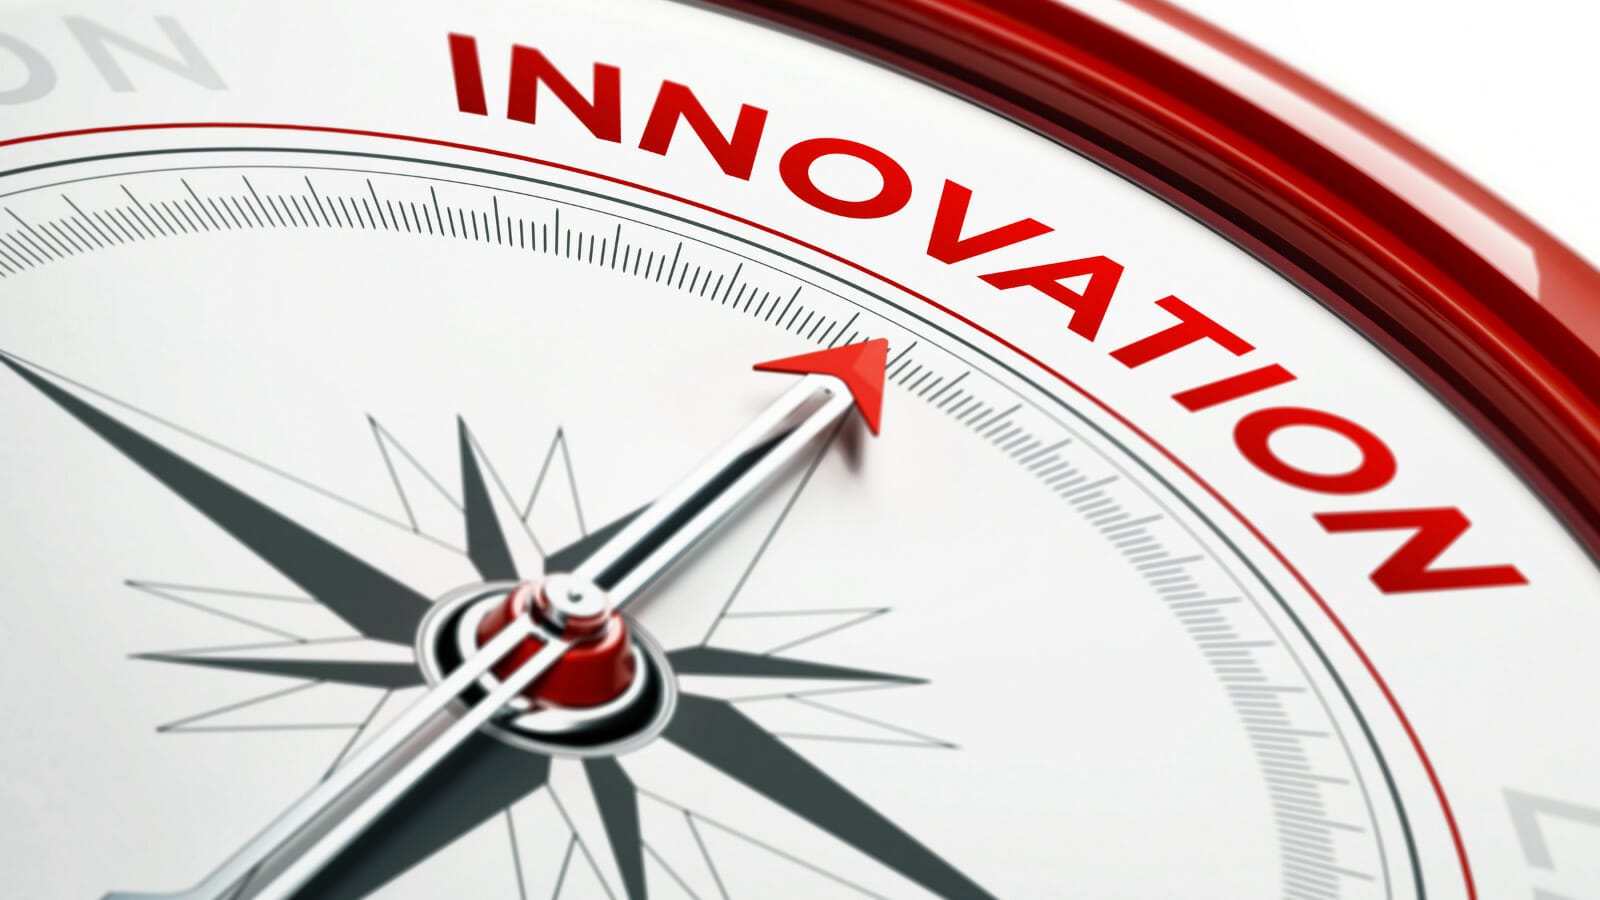 A compass pointing to innovate

